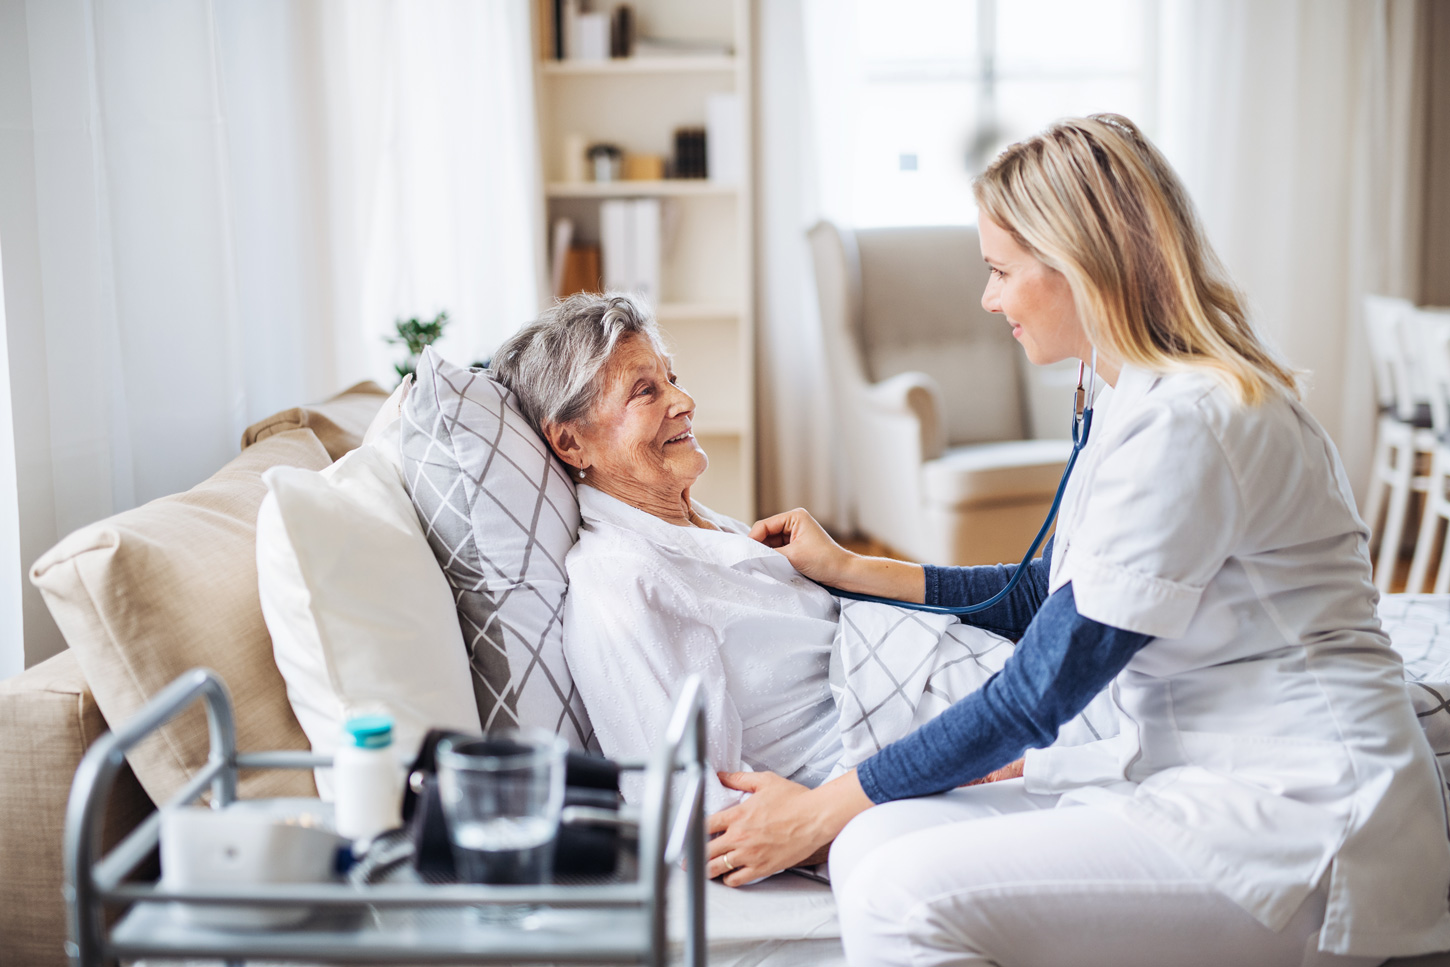 Home health practitioner attending to an elderly woman